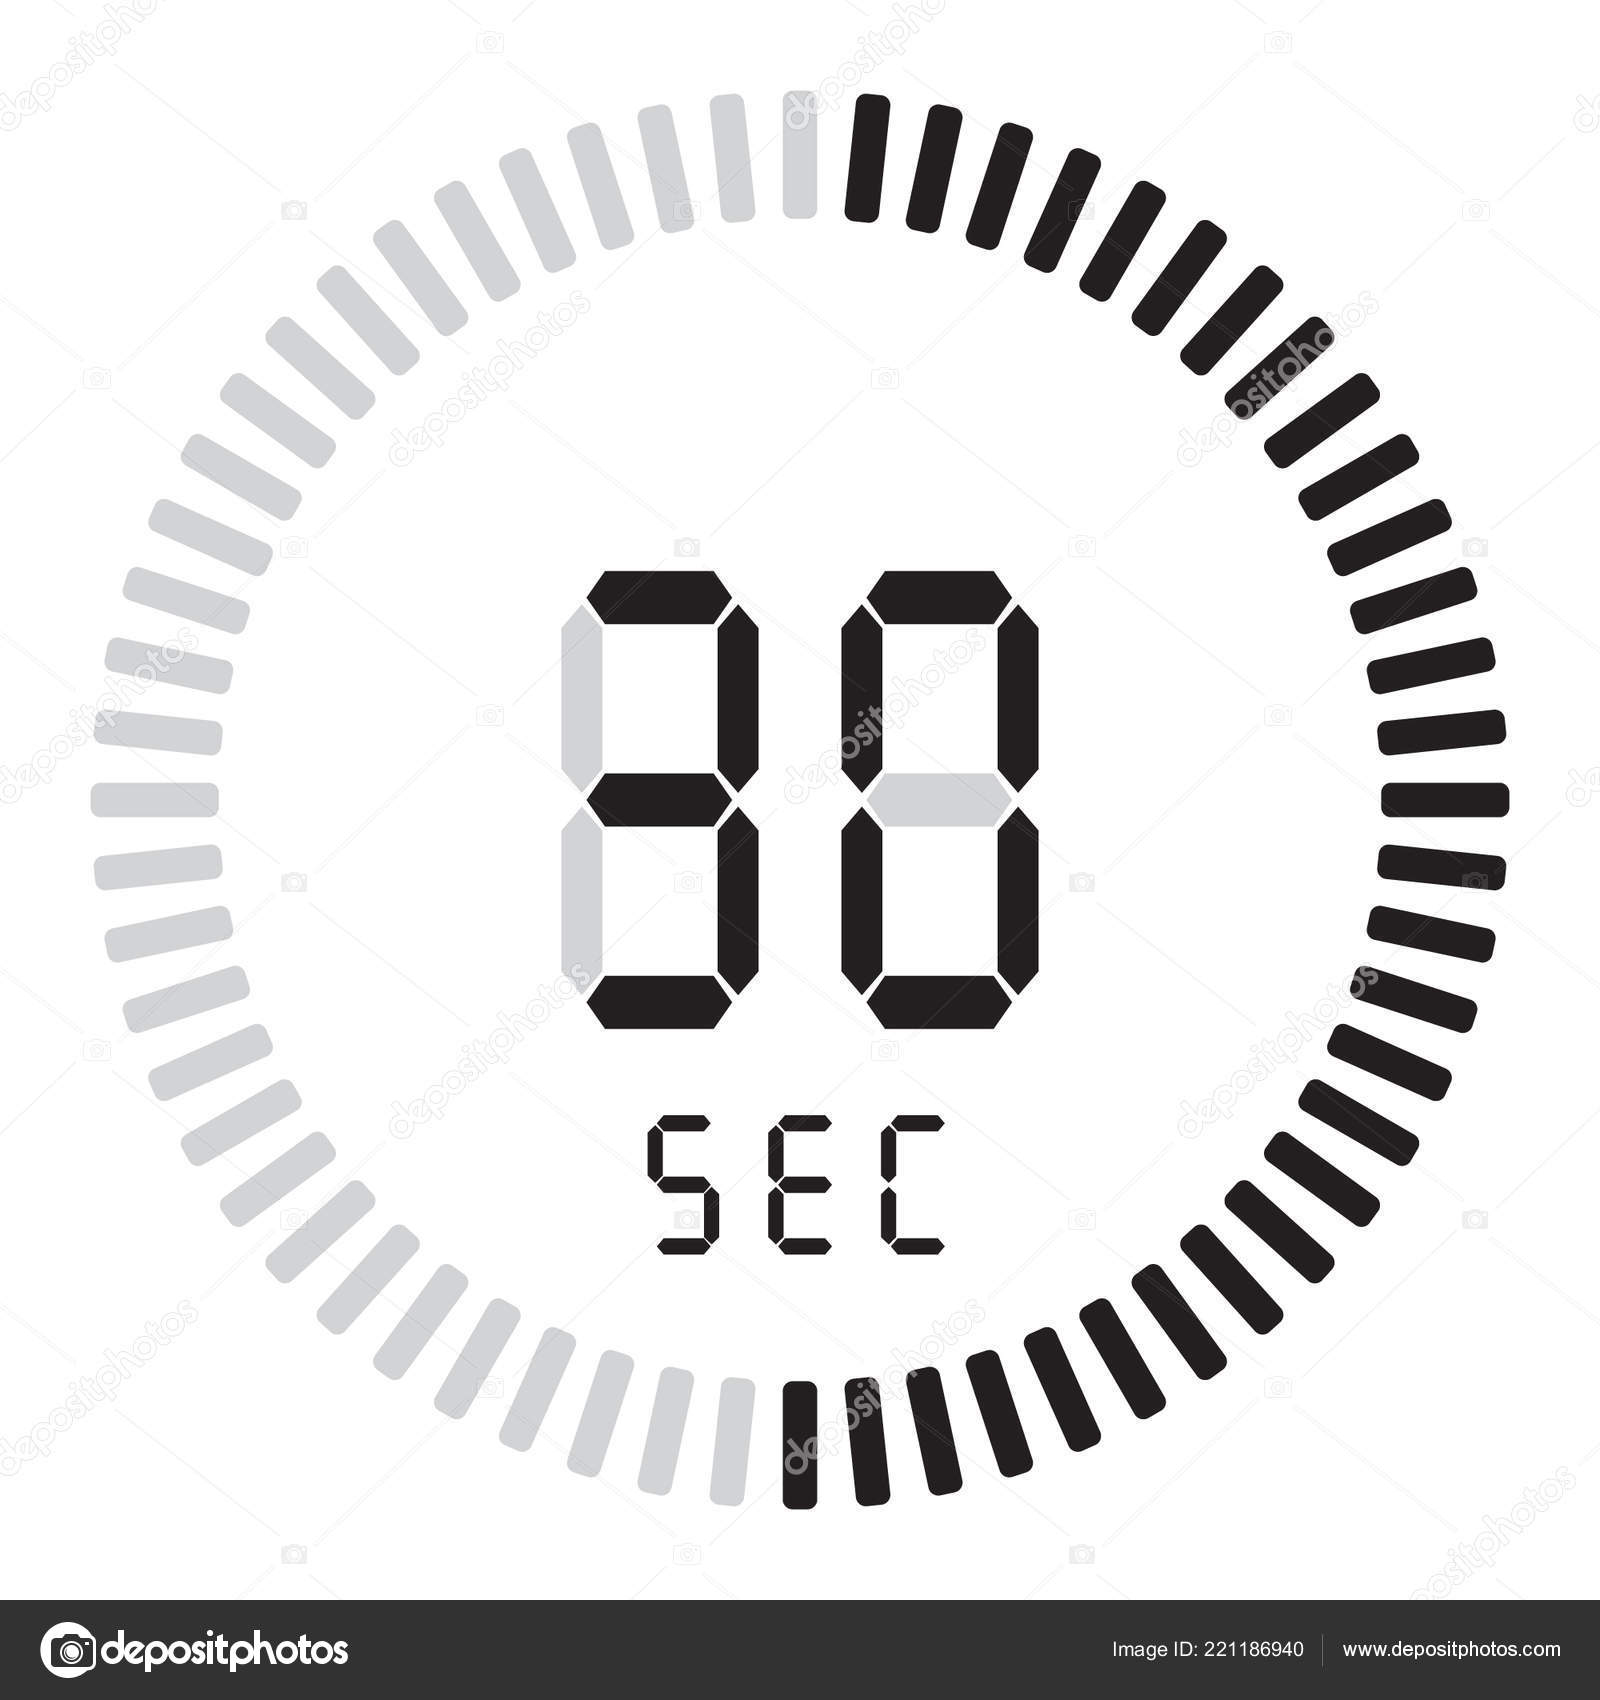 Stopwatch digital countdown timer with minutes and seconds vector